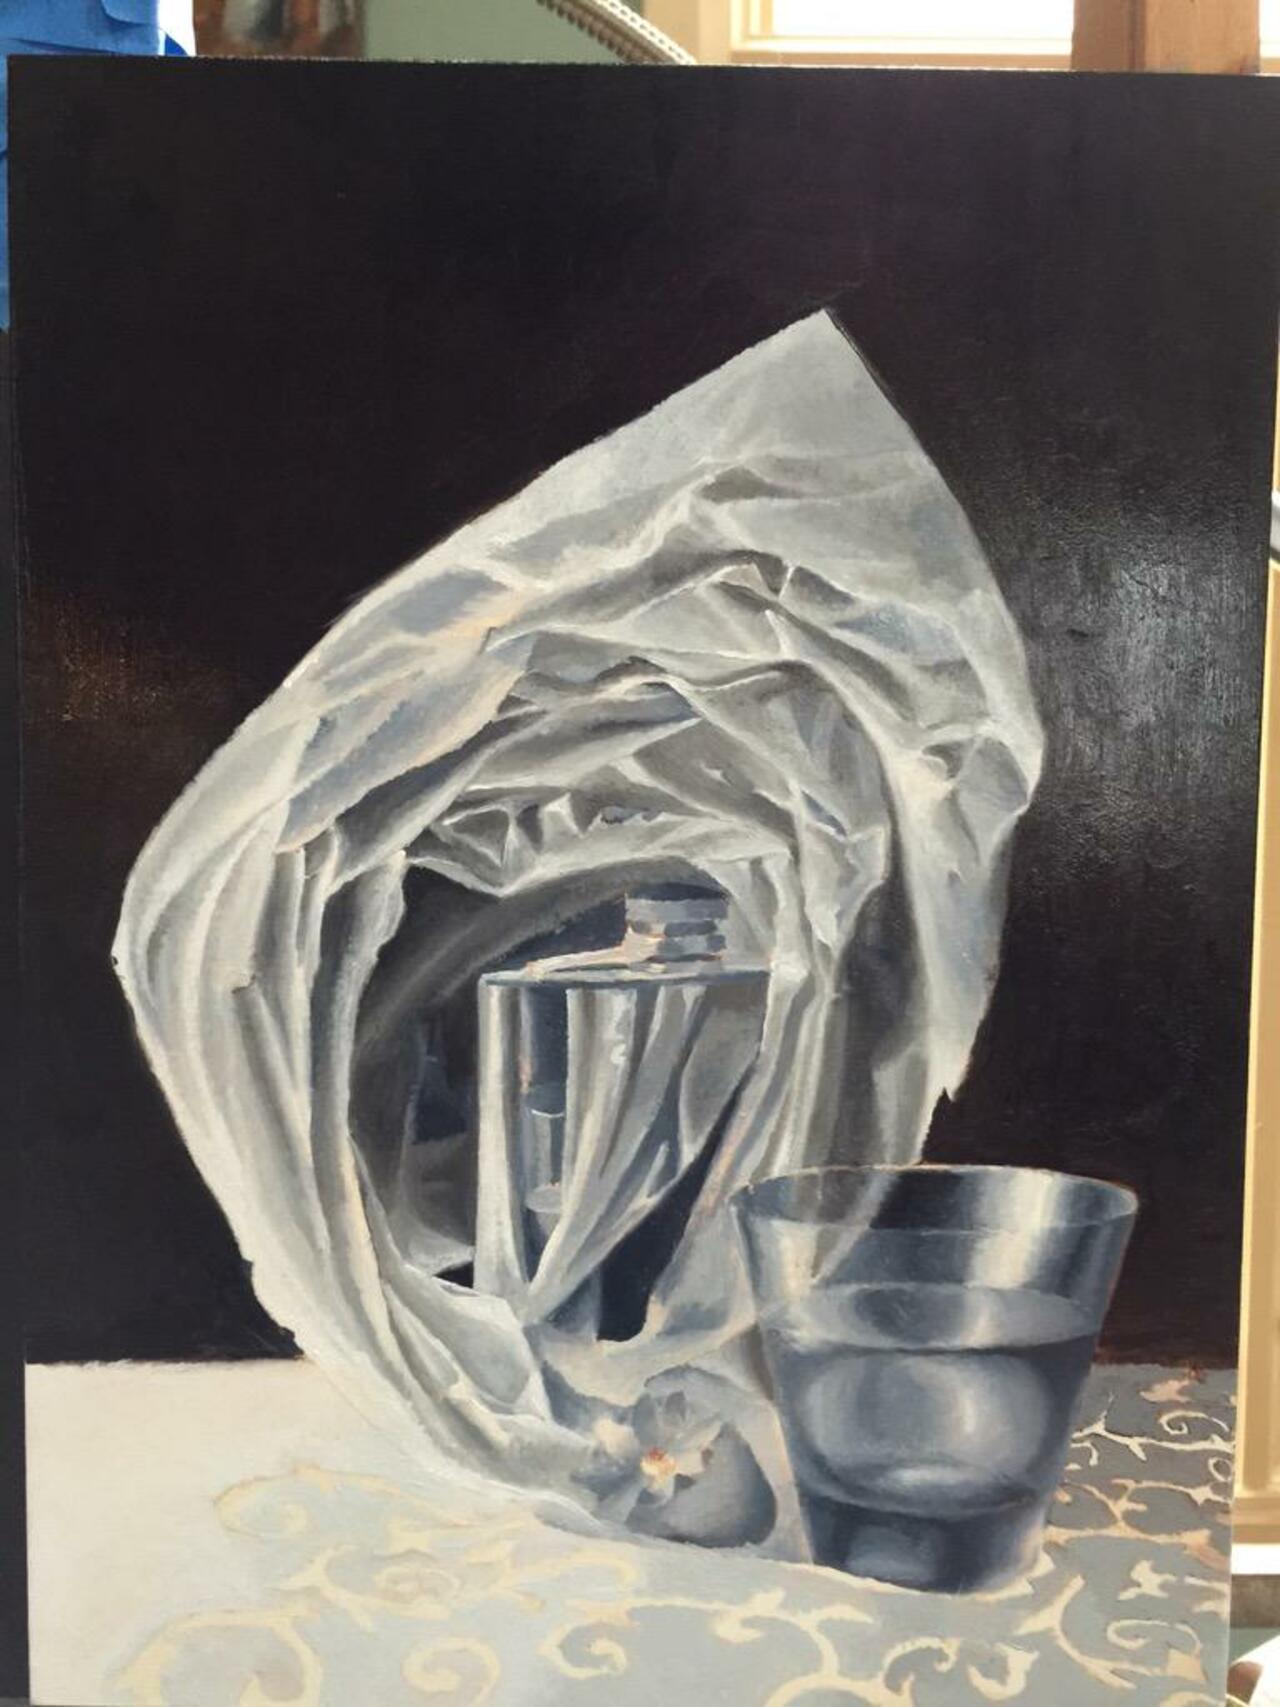 #stilllife #art Working on The third layer. Close grisaille. http://t.co/DwYdd4S07d